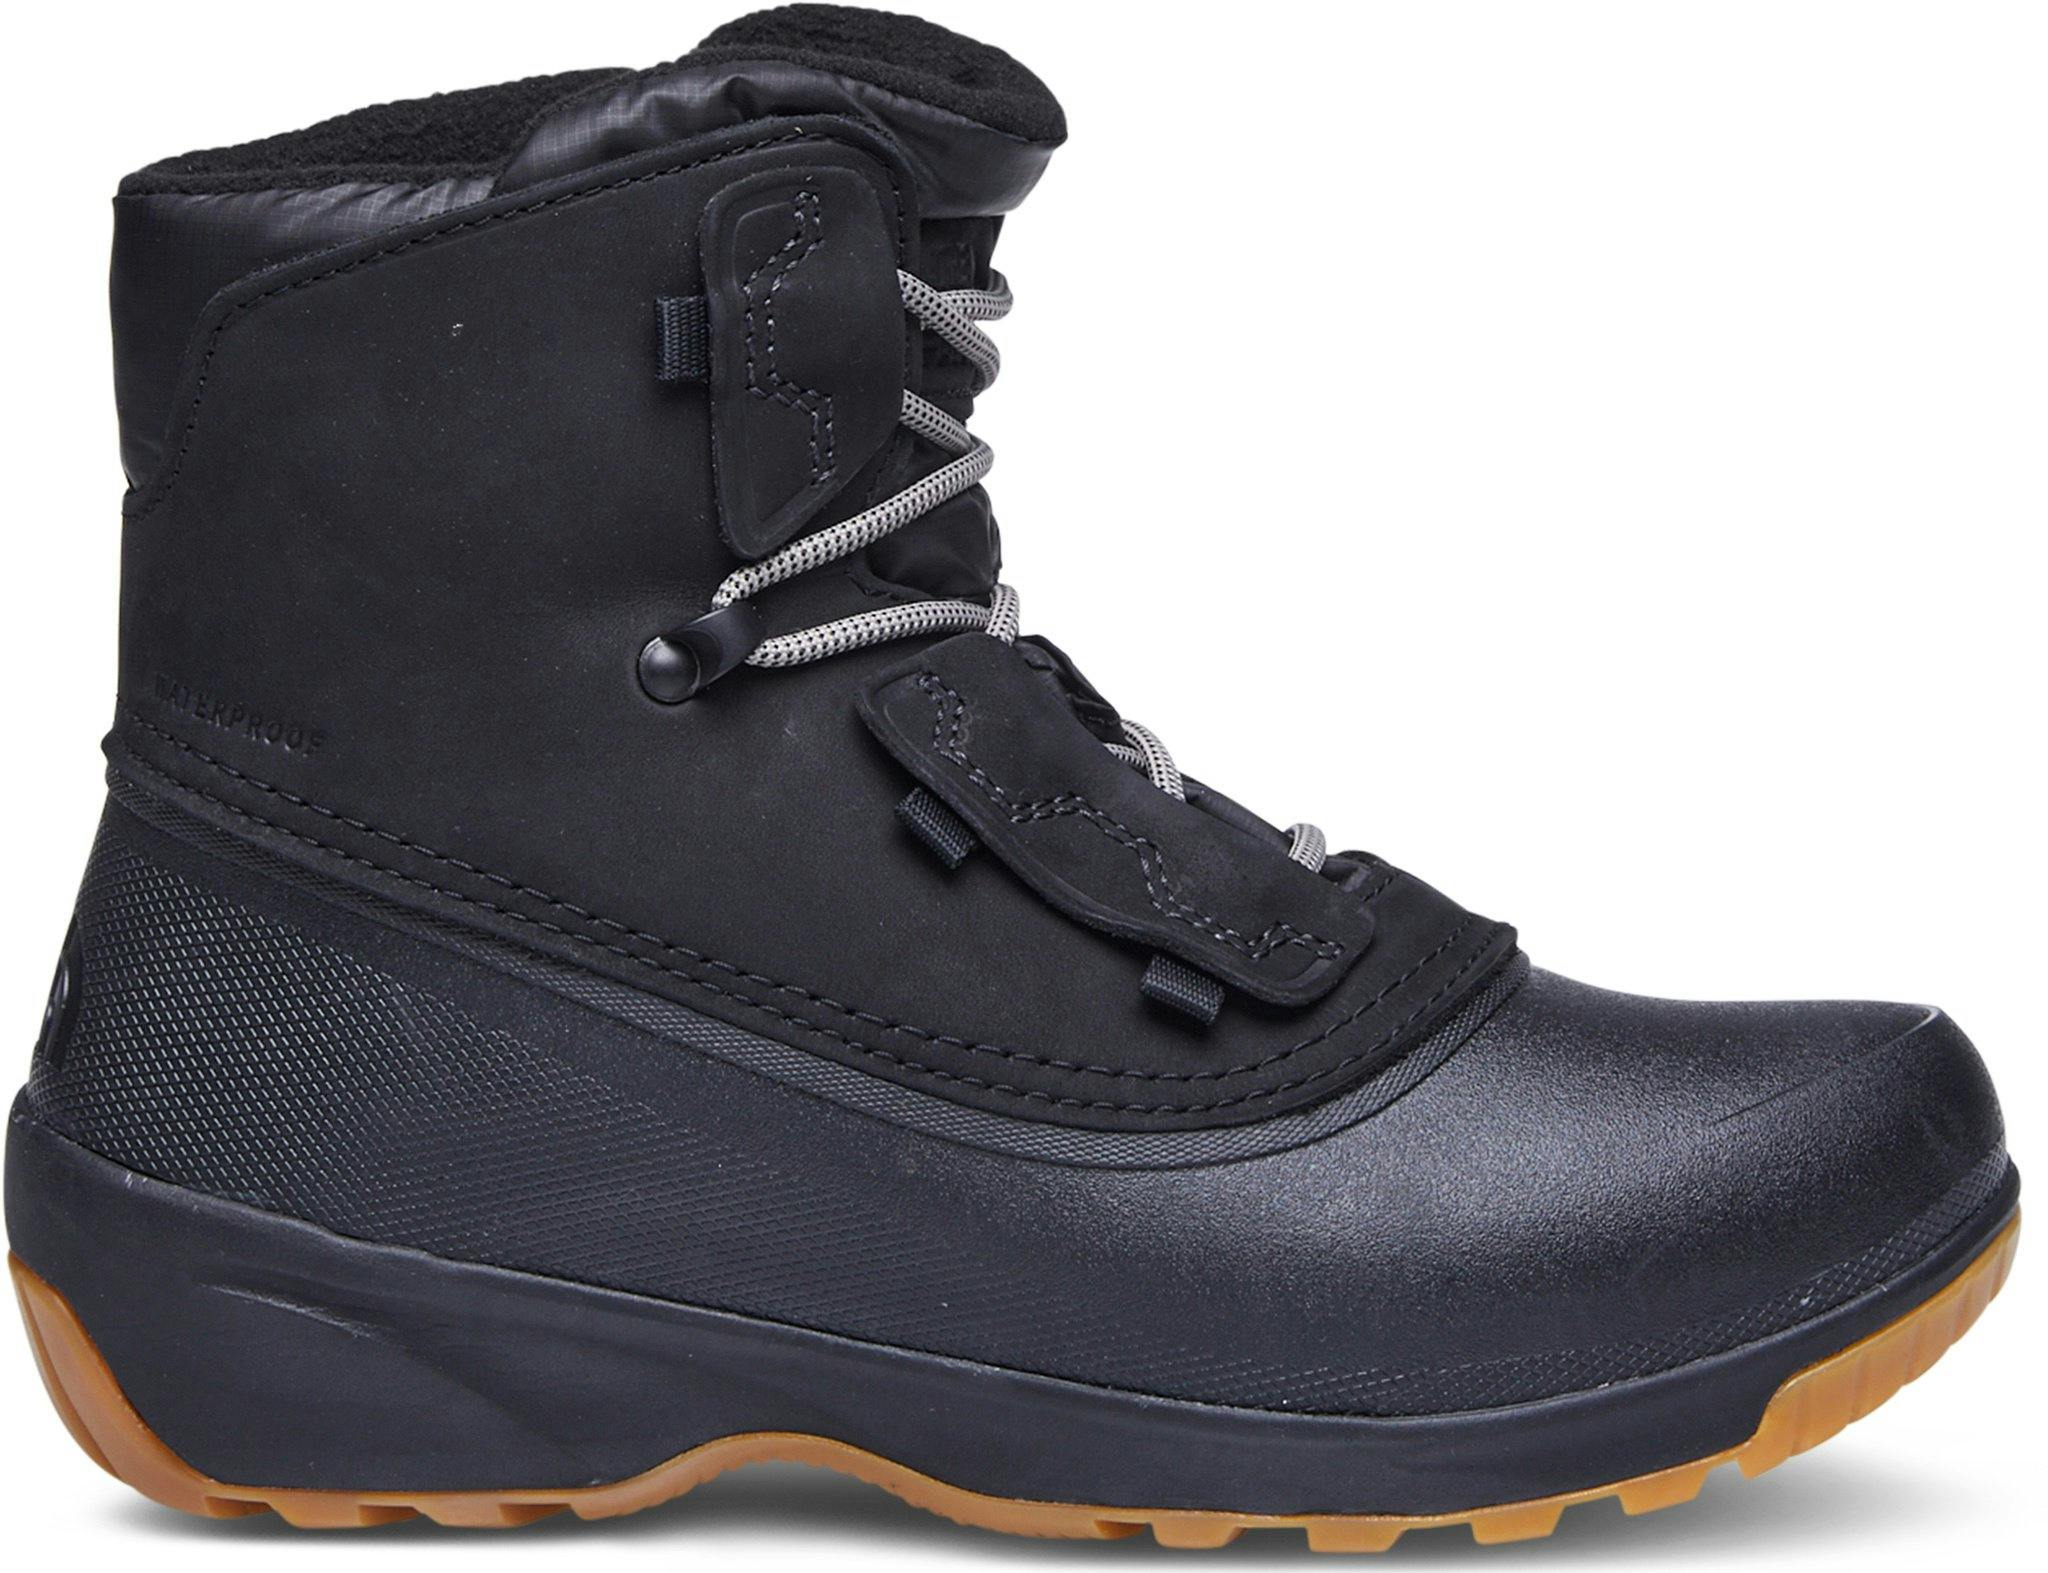 Product image for Shellista IV Shorty Waterproof Boots - Women's